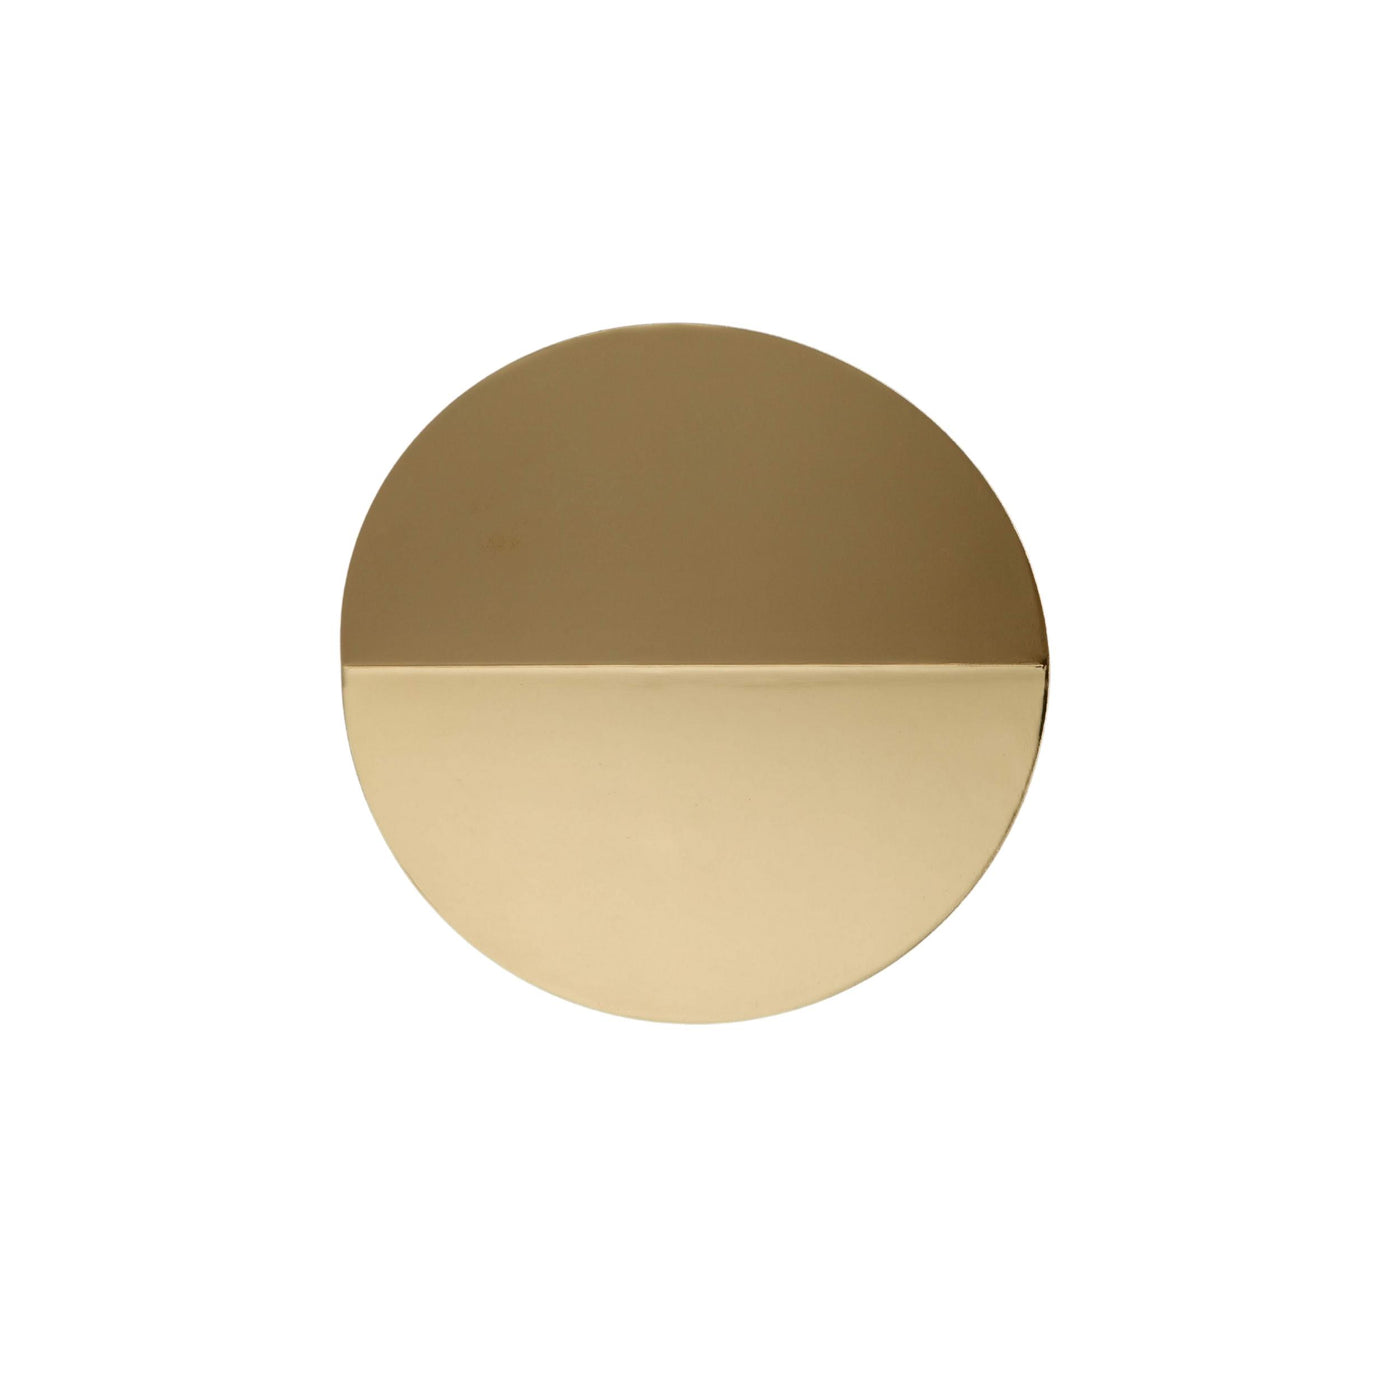 Houseof Diffuser Wall Light. British design at someday designs. #colour_brass